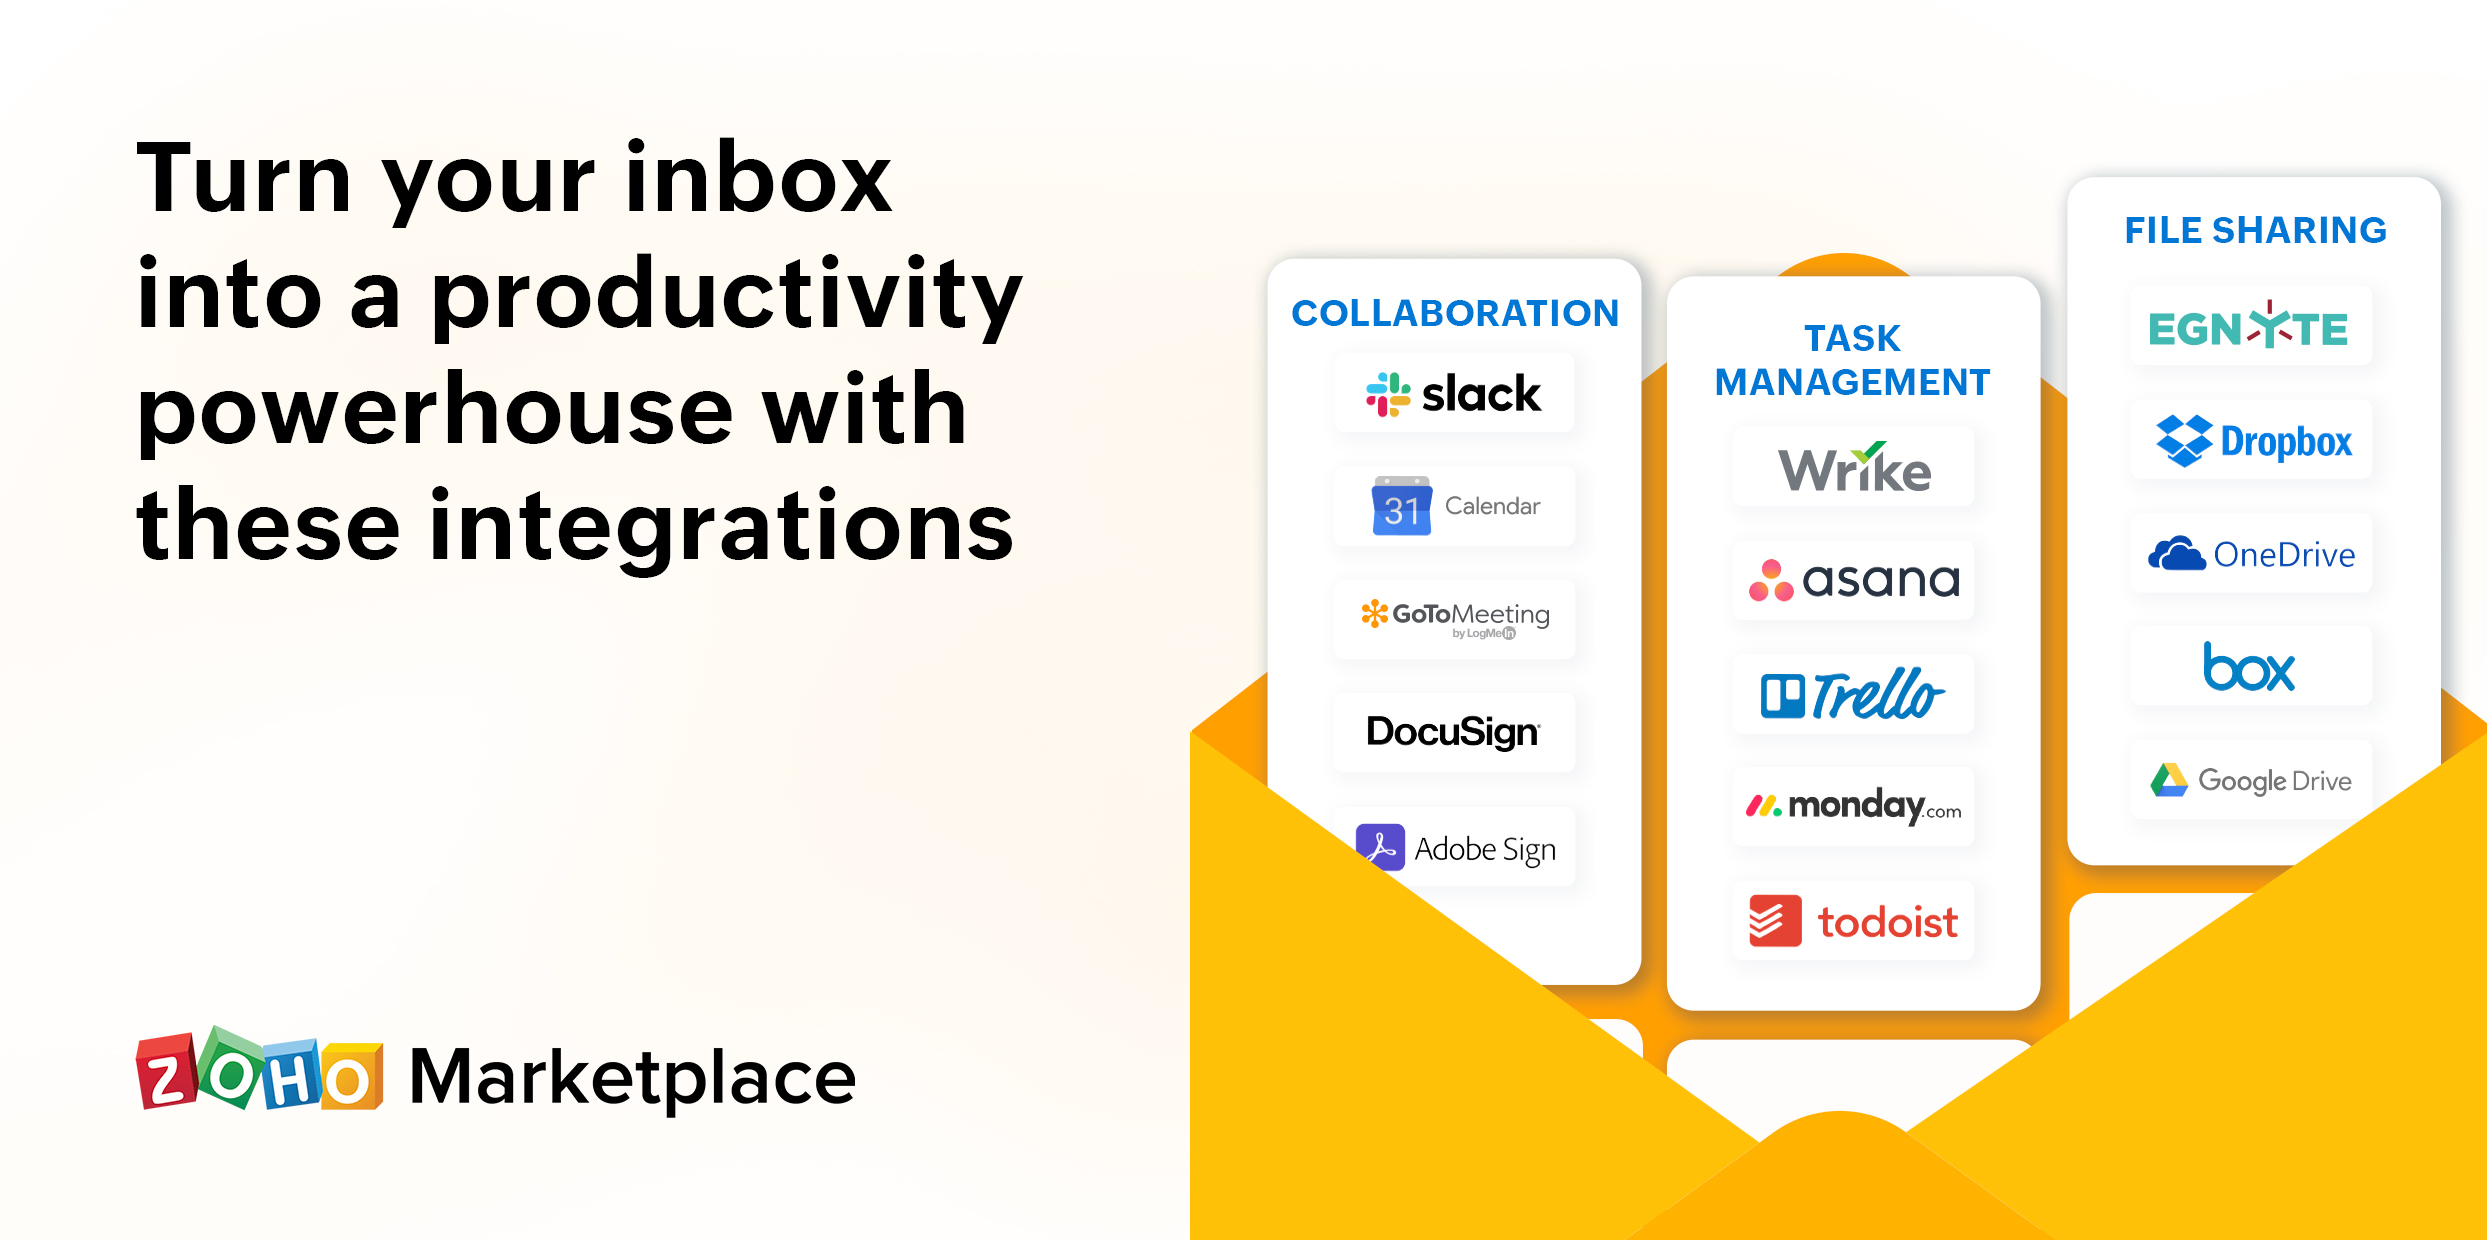 Turn your inbox into a productivity powerhouse with these integrations